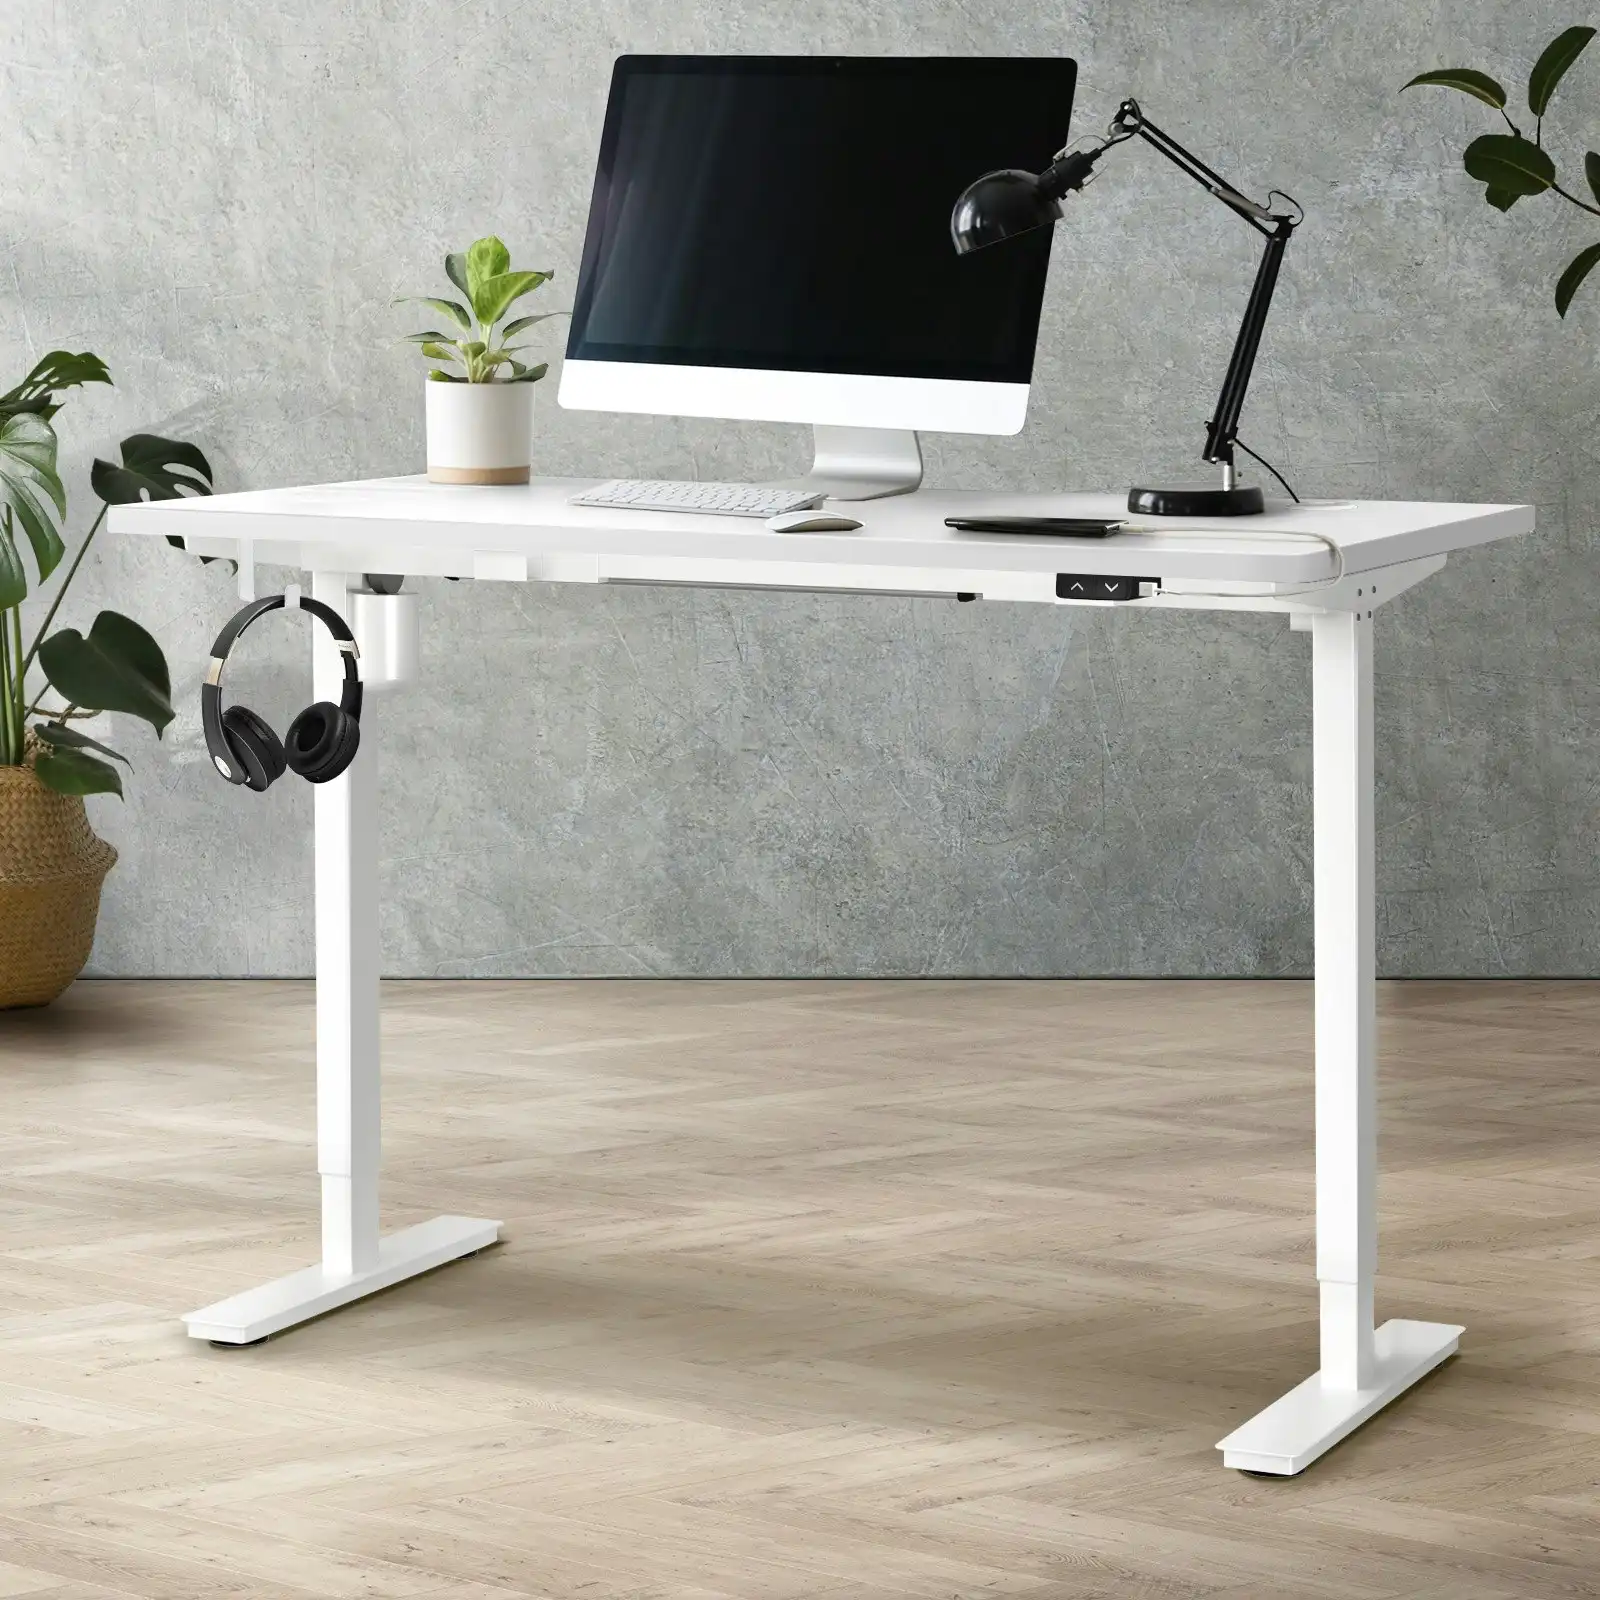 Oikiture 140CM Electric Standing Desk Single Motor Table Top White